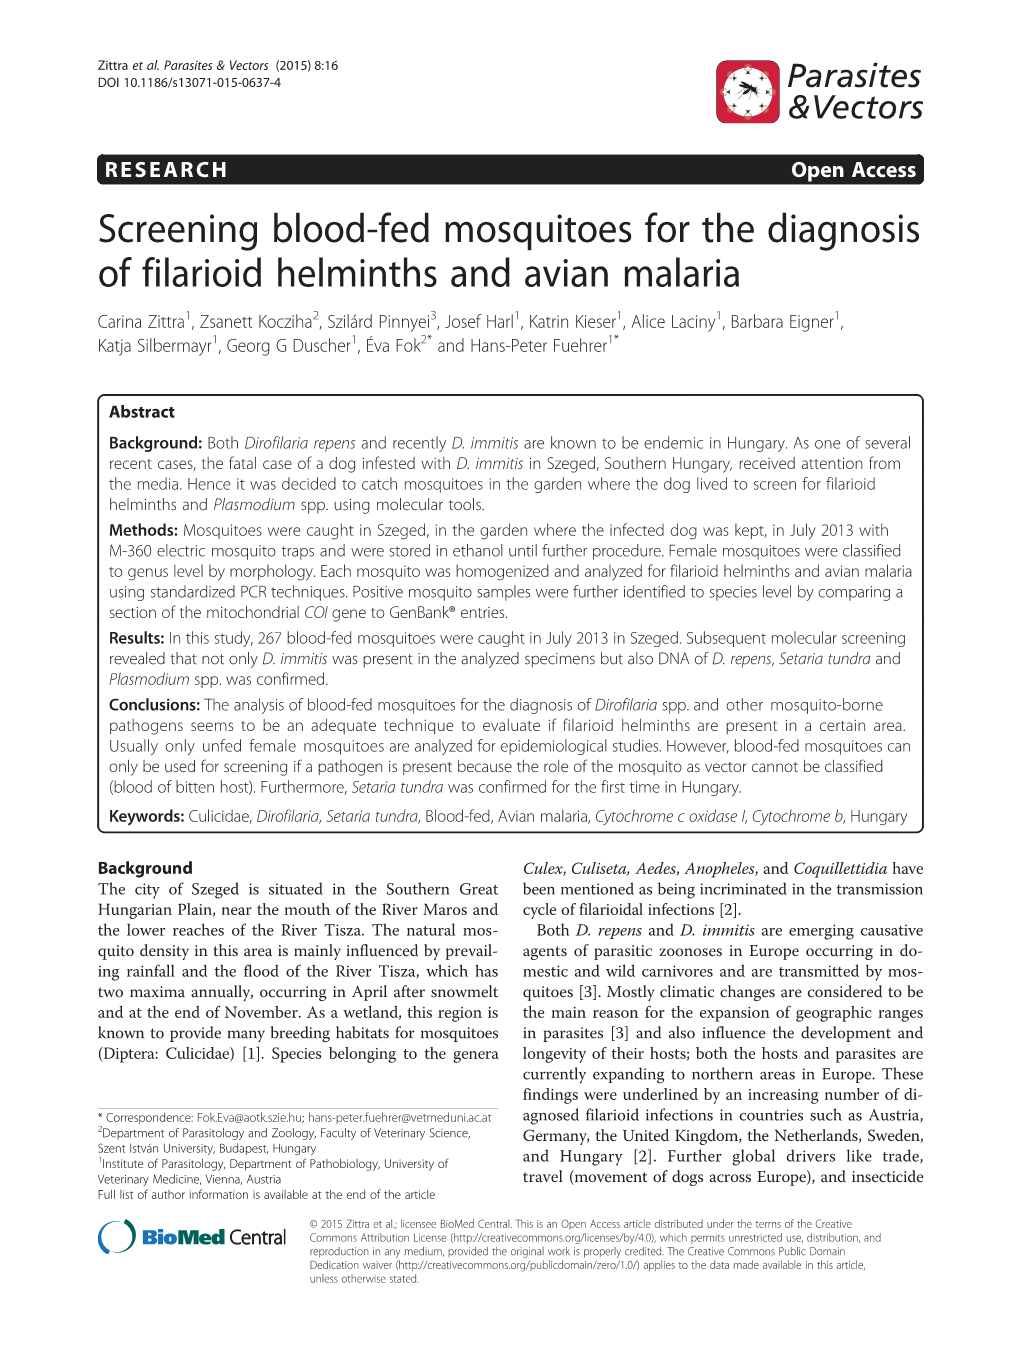 Screening Blood-Fed Mosquitoes for the Diagnosis of Filarioid Helminths